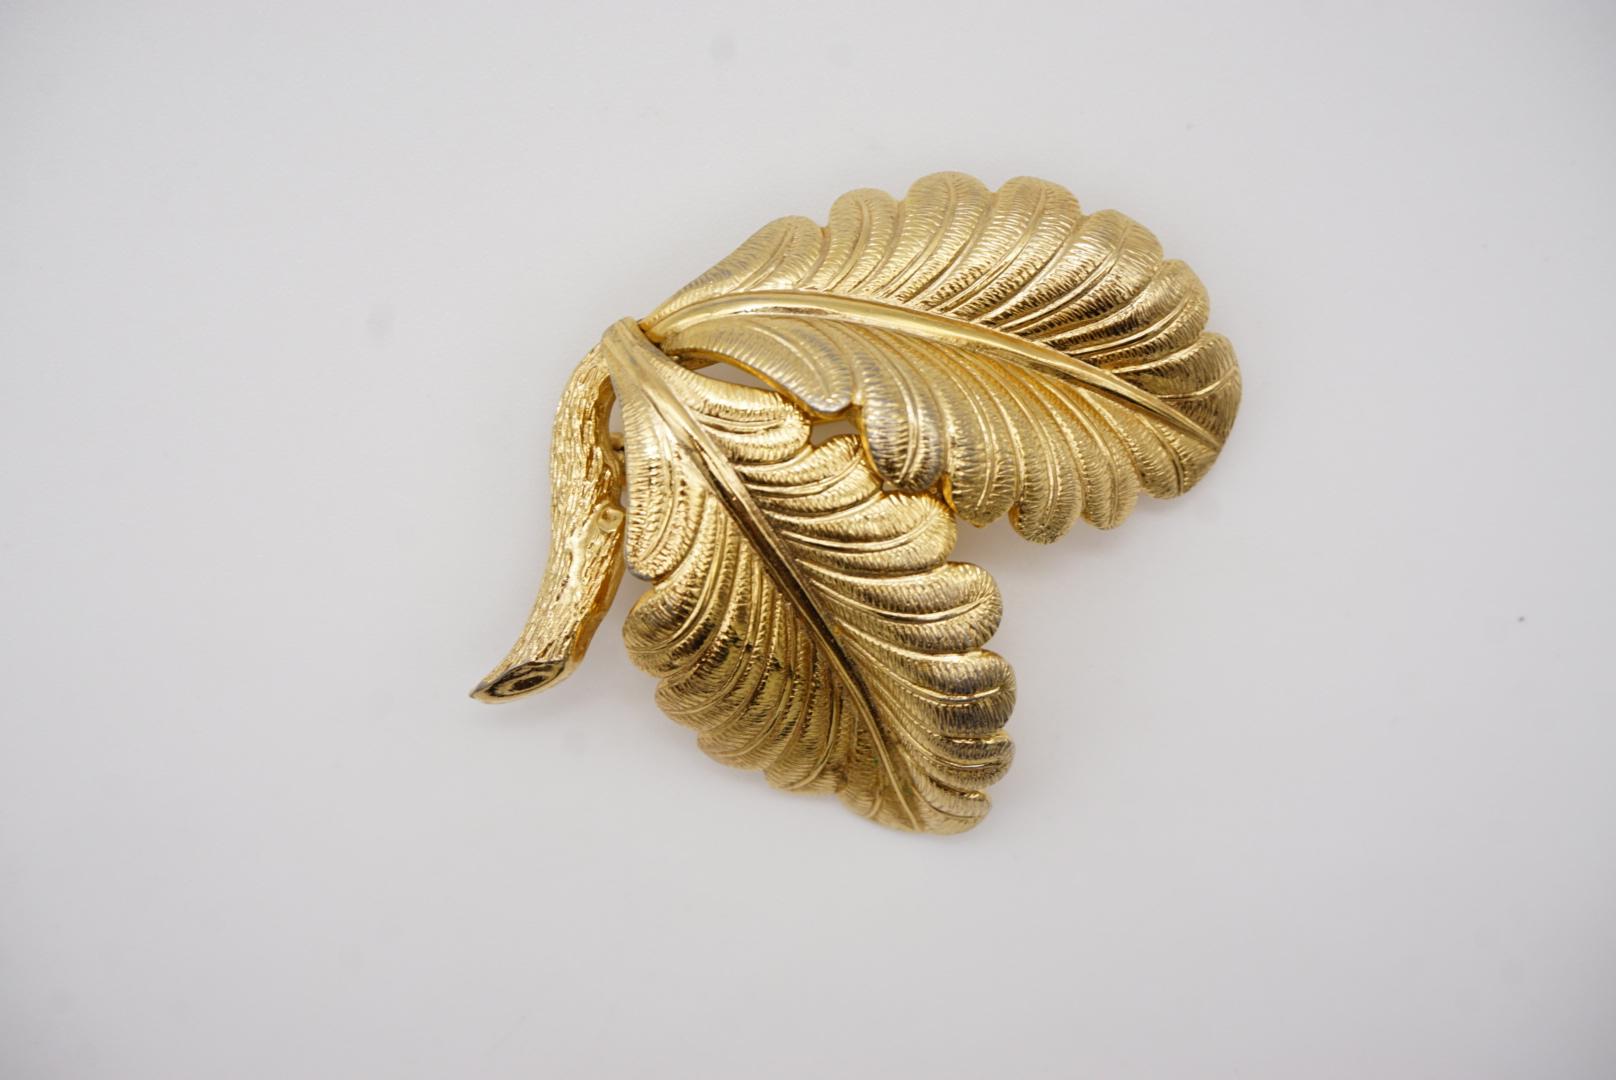 Christian Dior GROSSE 1962 Vintage Textured Double Palm Tree Leaf Gold Brooch In Excellent Condition For Sale In Wokingham, England